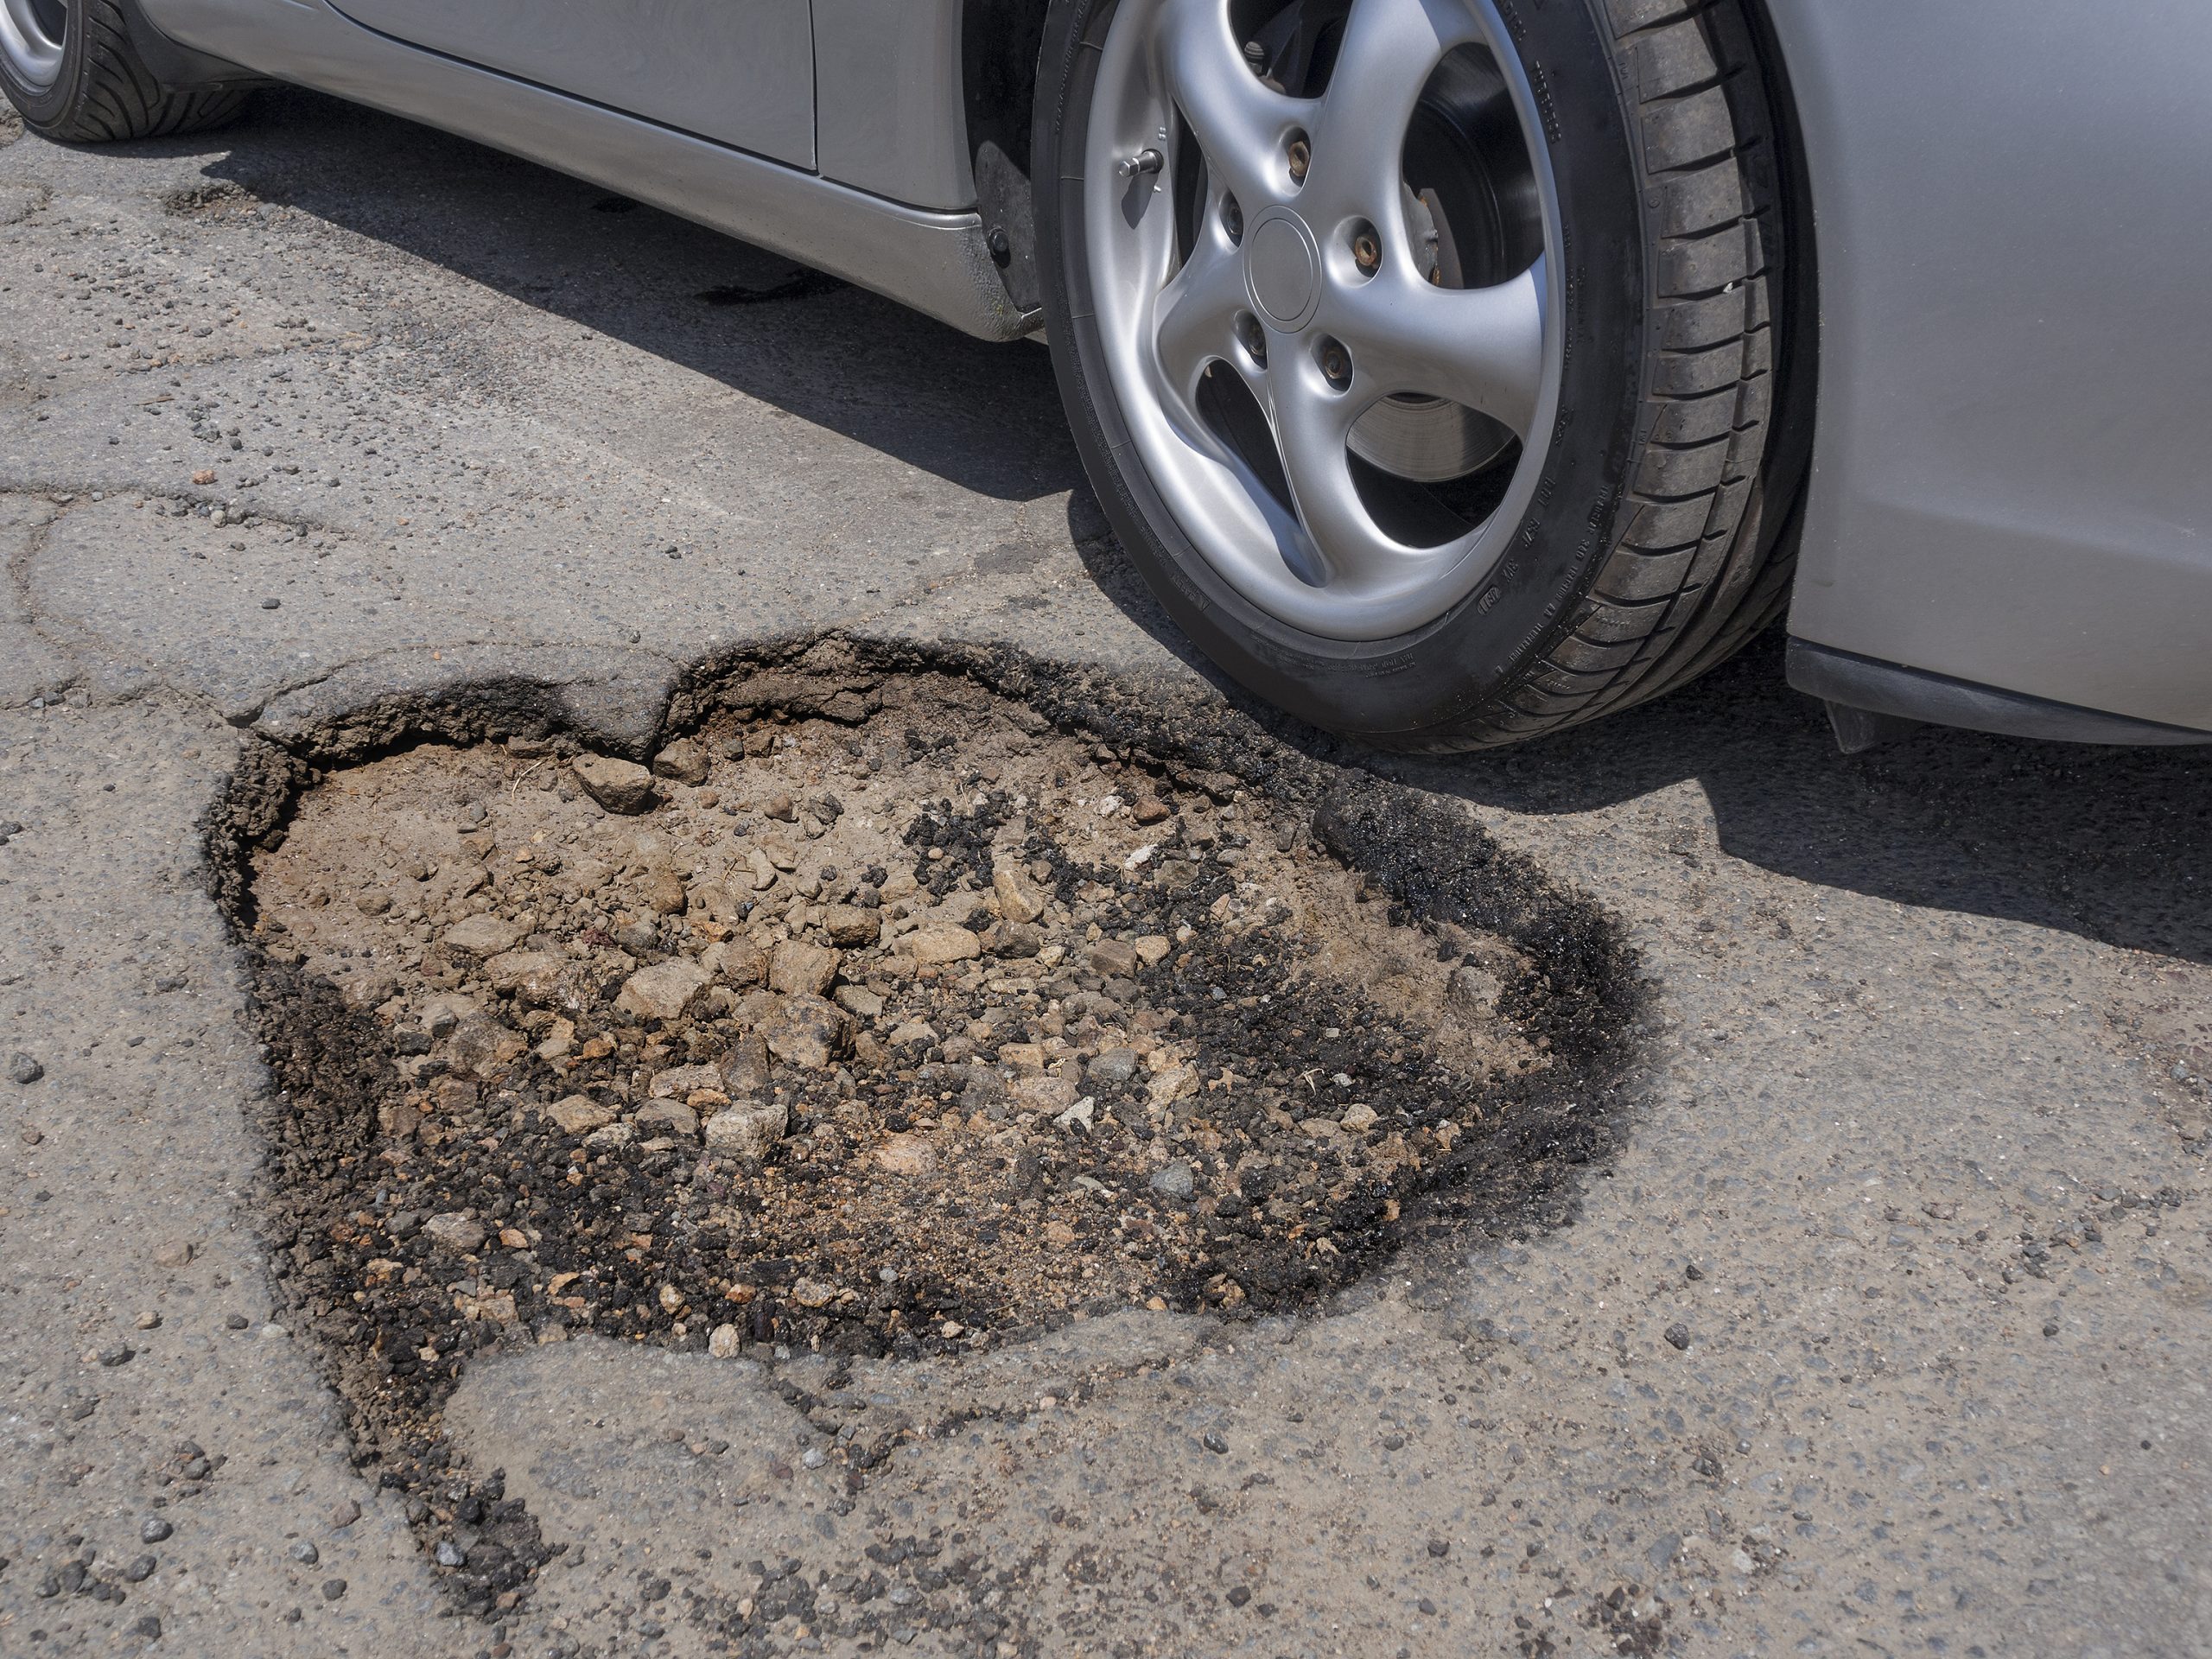 ‘Untold misery’ – driving expert reveals six hacks to deal with potholes including little-known ‘tyre inflation’ trick